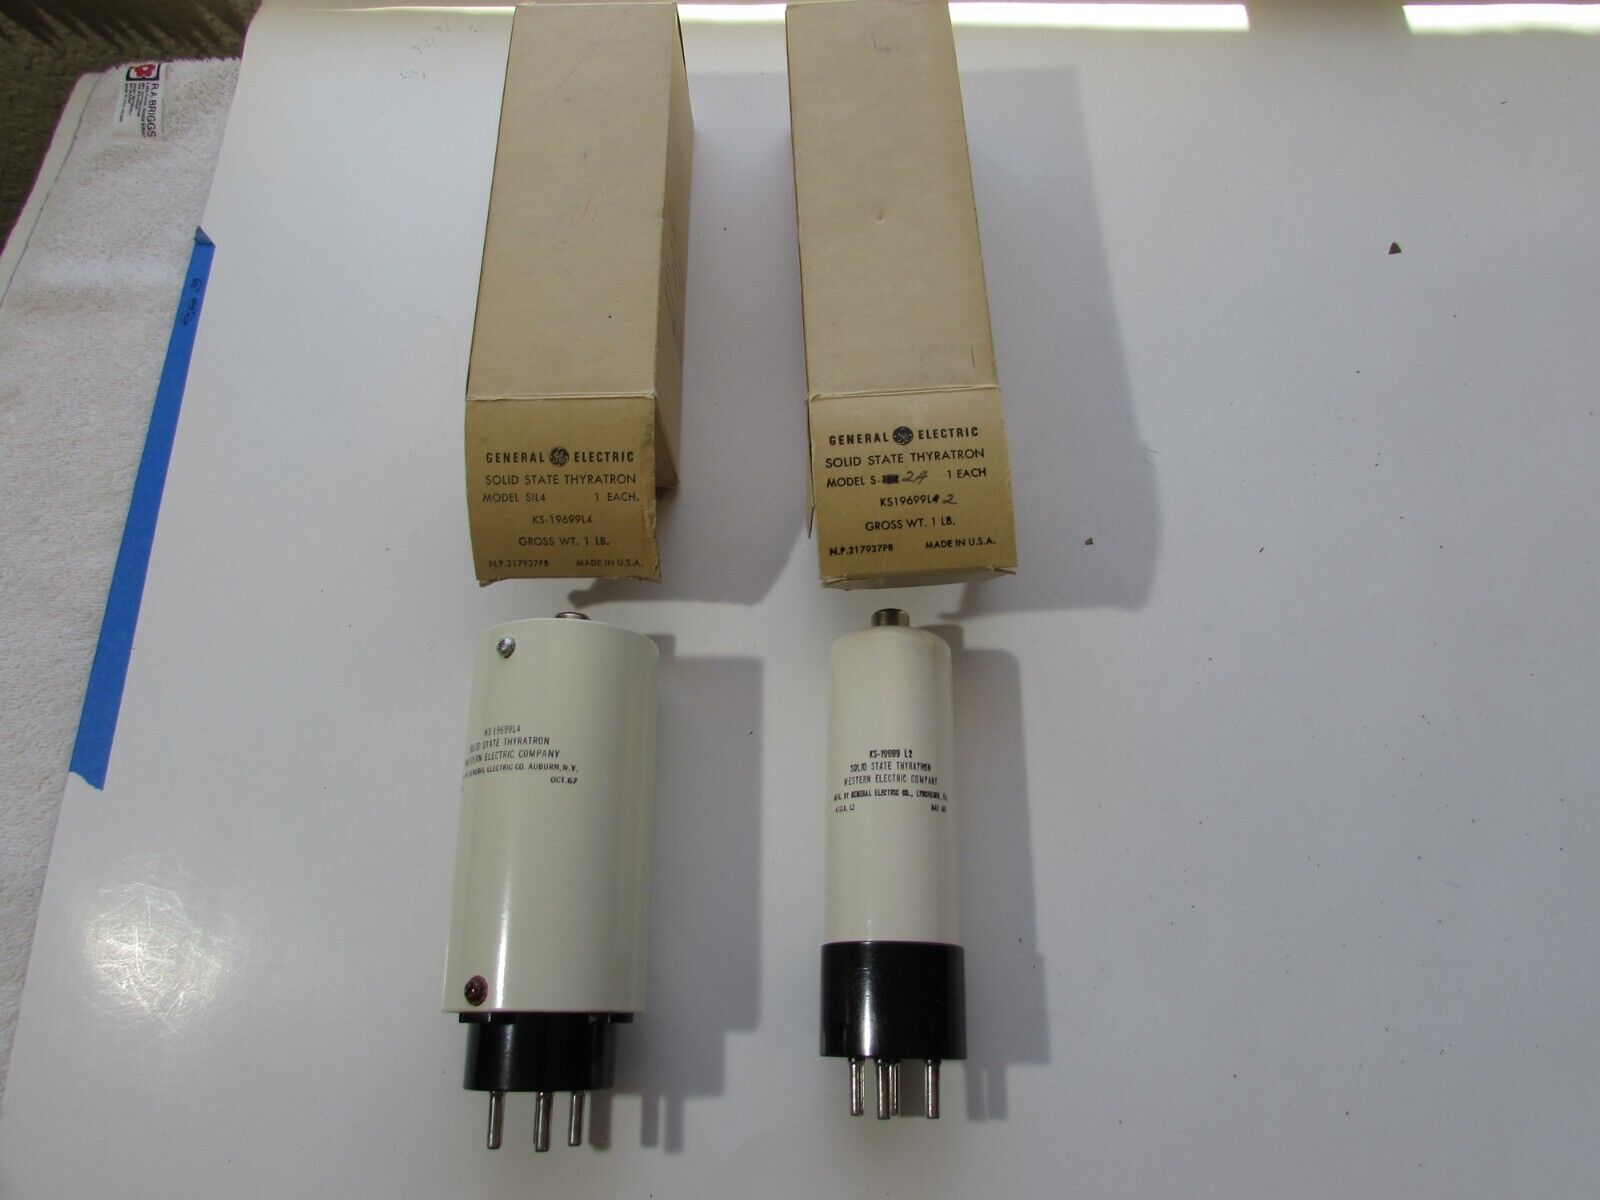 Western Electric Tubes Solid State Thyratron Tube Made by General Electric (2)